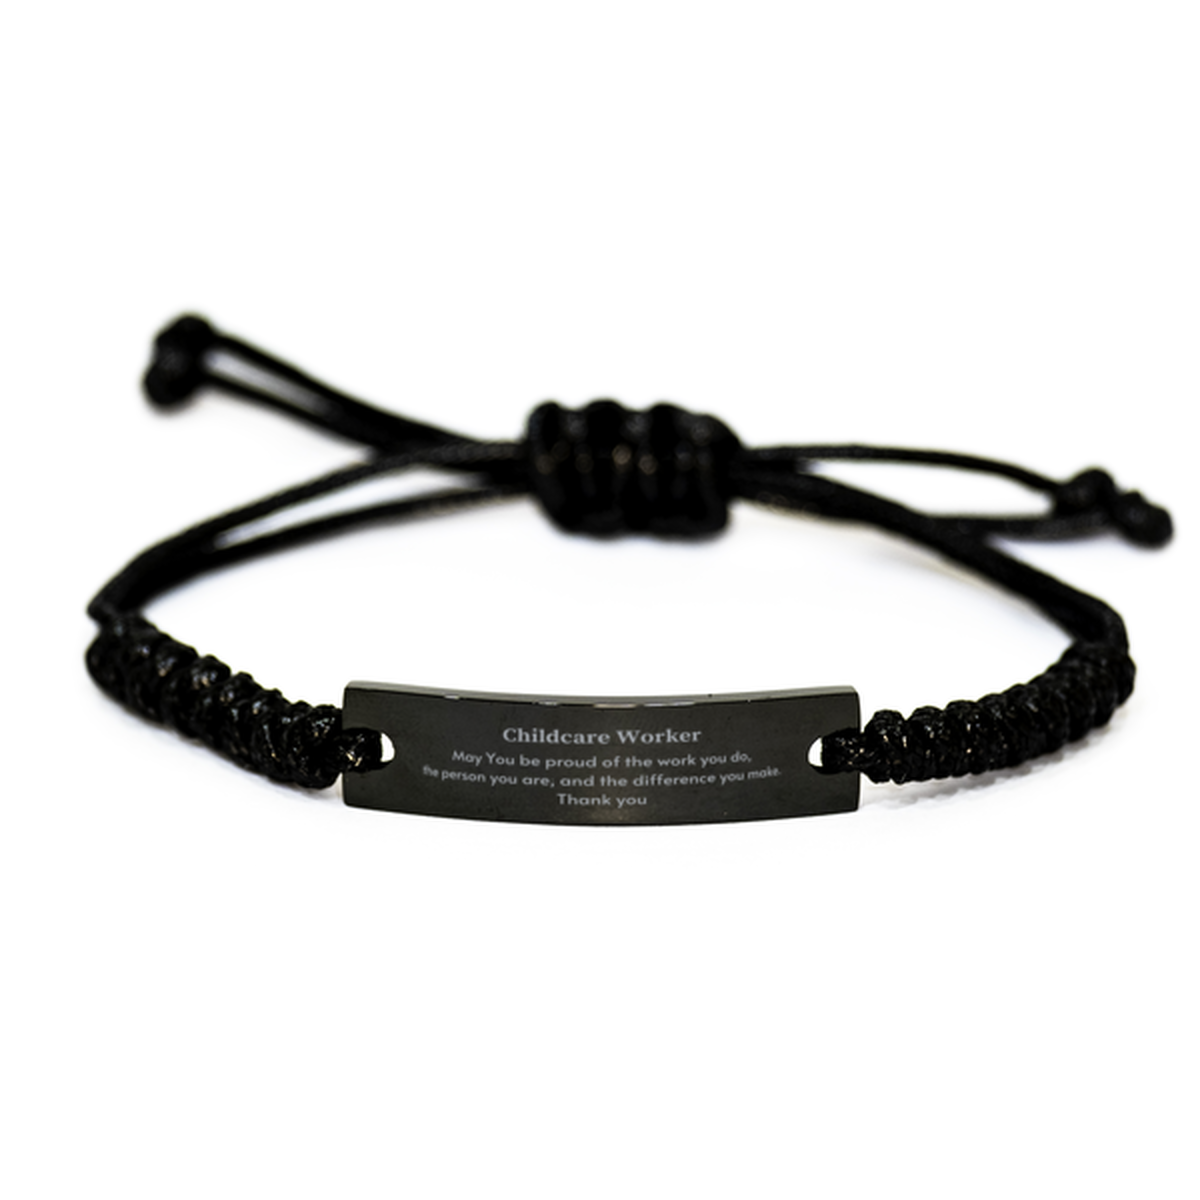 Heartwarming Black Rope Bracelet Retirement Coworkers Gifts for Childcare Worker, Childcare Worker May You be proud of the work you do, the person you are Gifts for Boss Men Women Friends